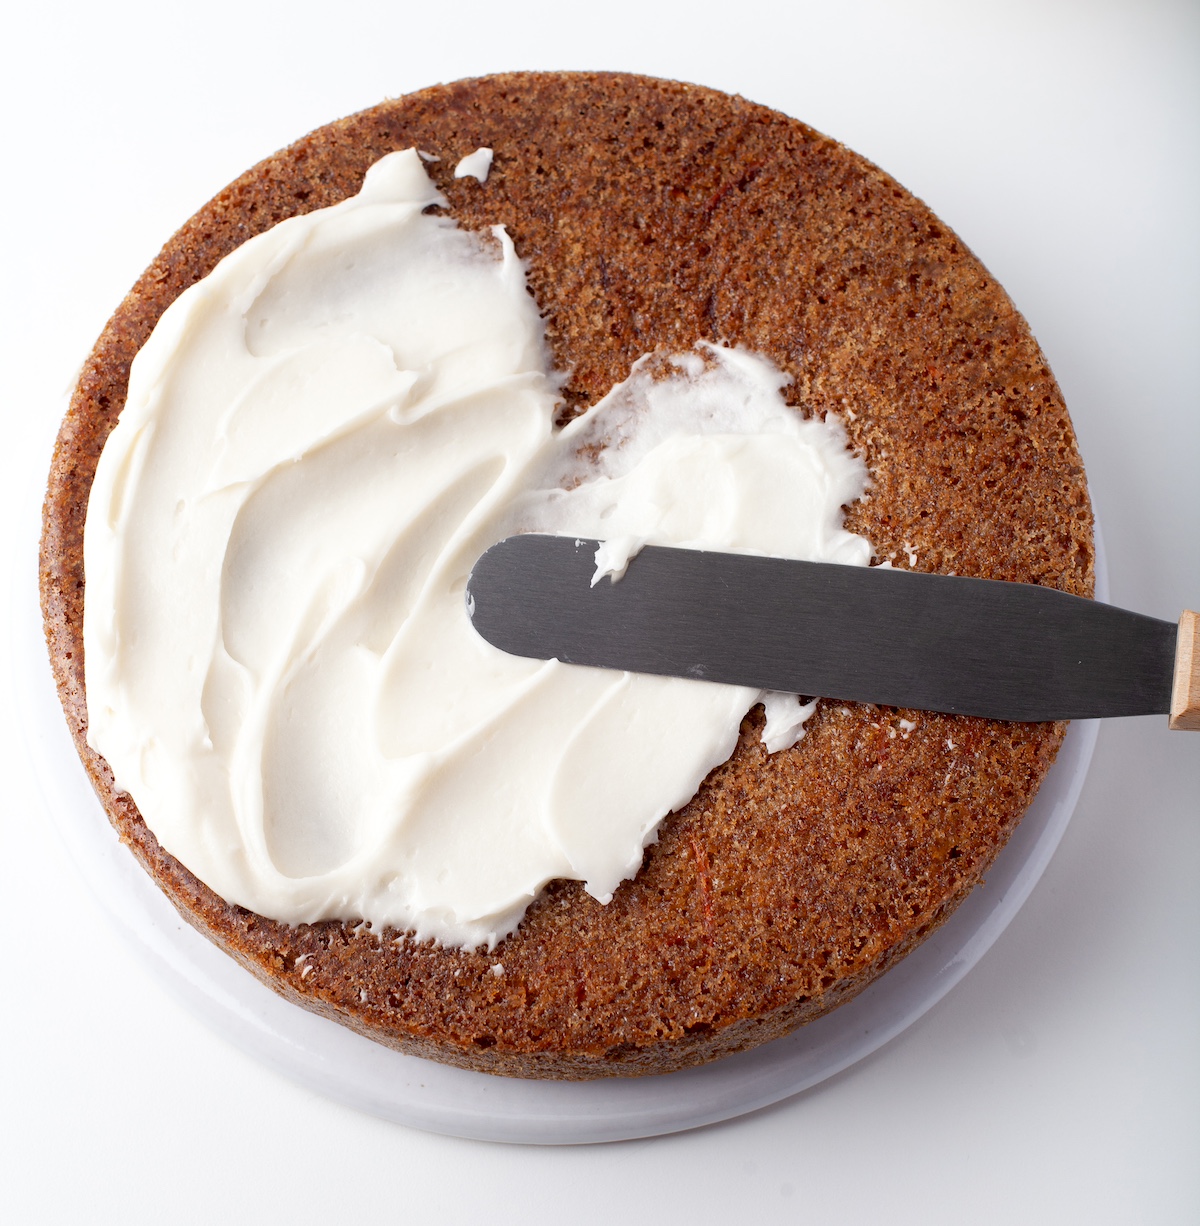 Frosting a carrot cake with cream cheese frosting